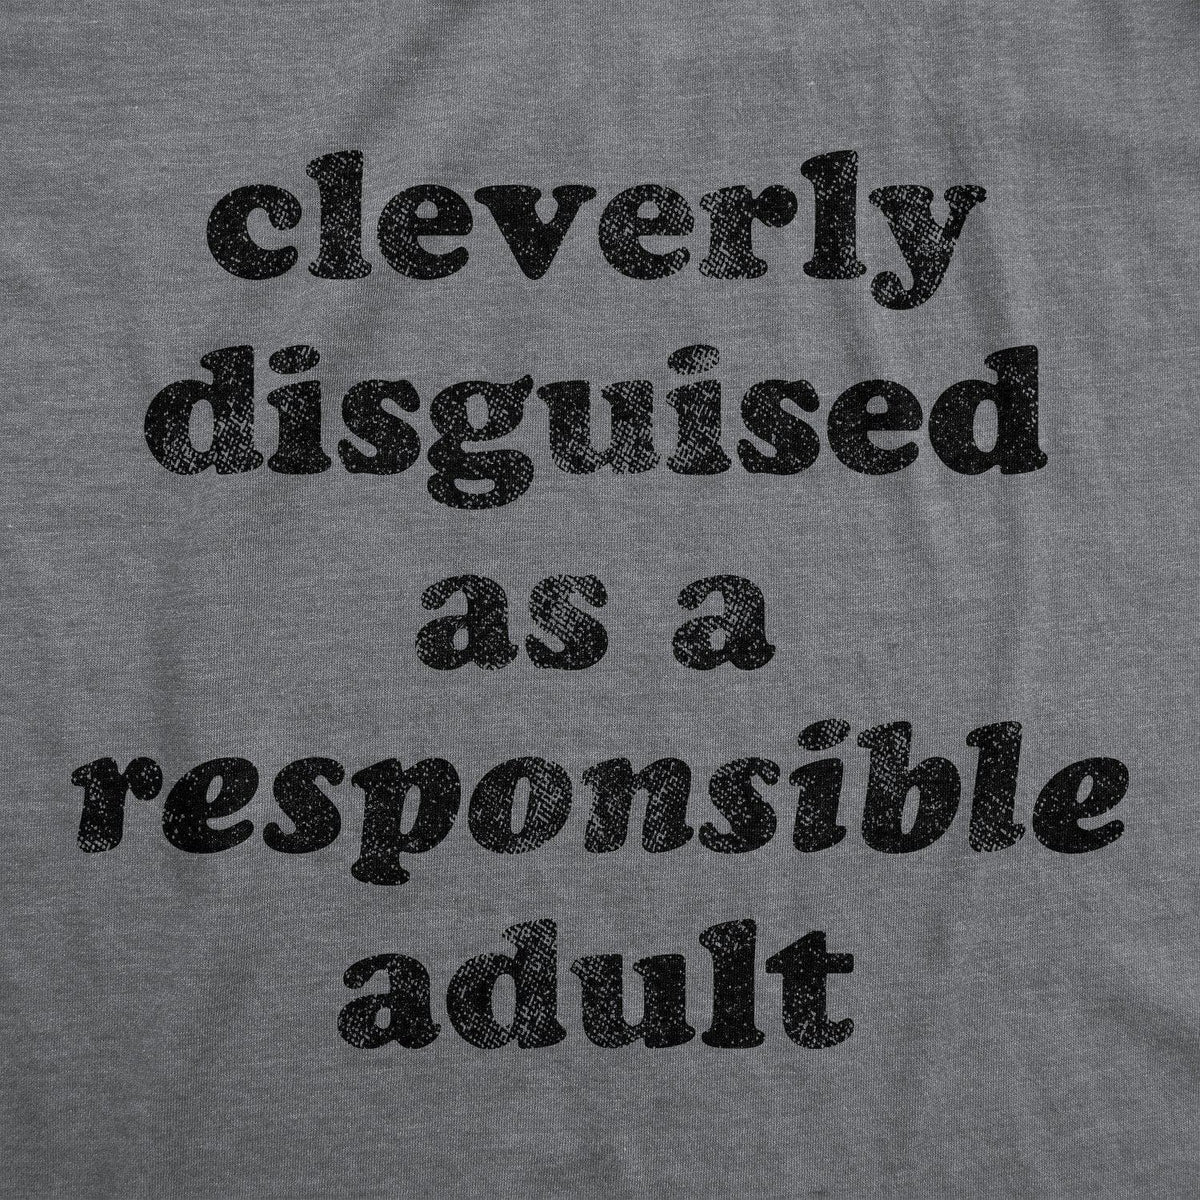 Cleverly Disguised As A Responsible Adult Women&#39;s Tshirt - Crazy Dog T-Shirts